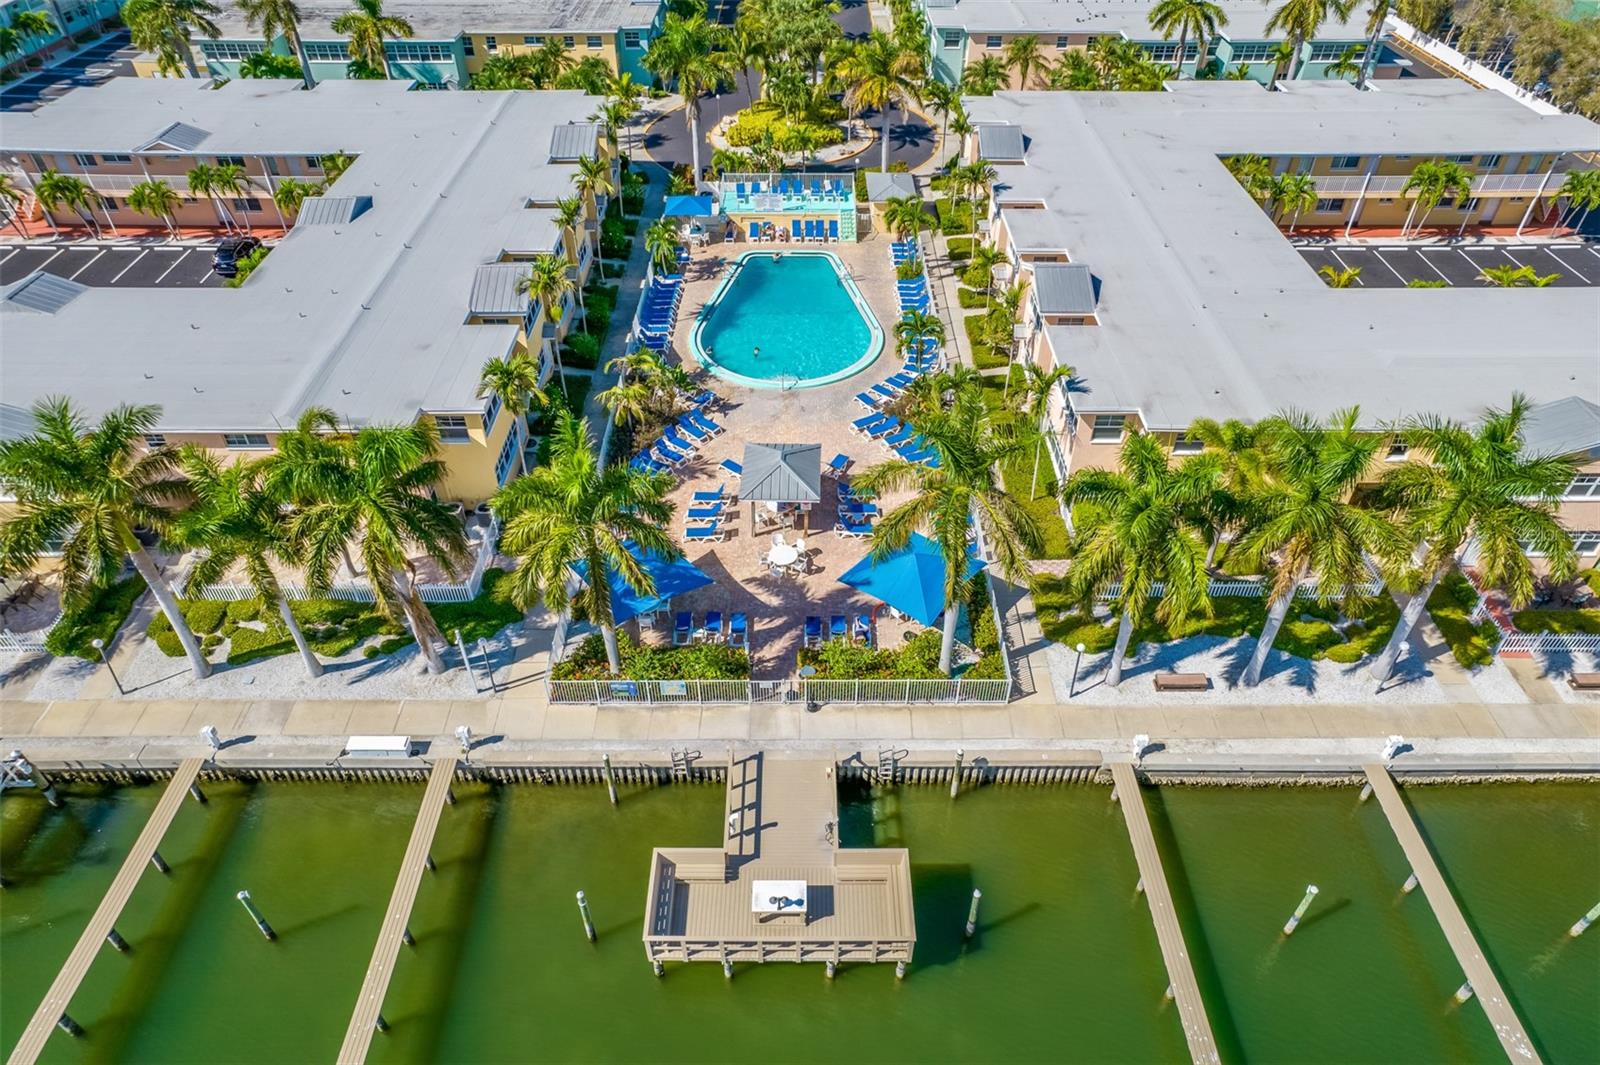 Resort Pool and Community Dock are the centerpiece of the complex